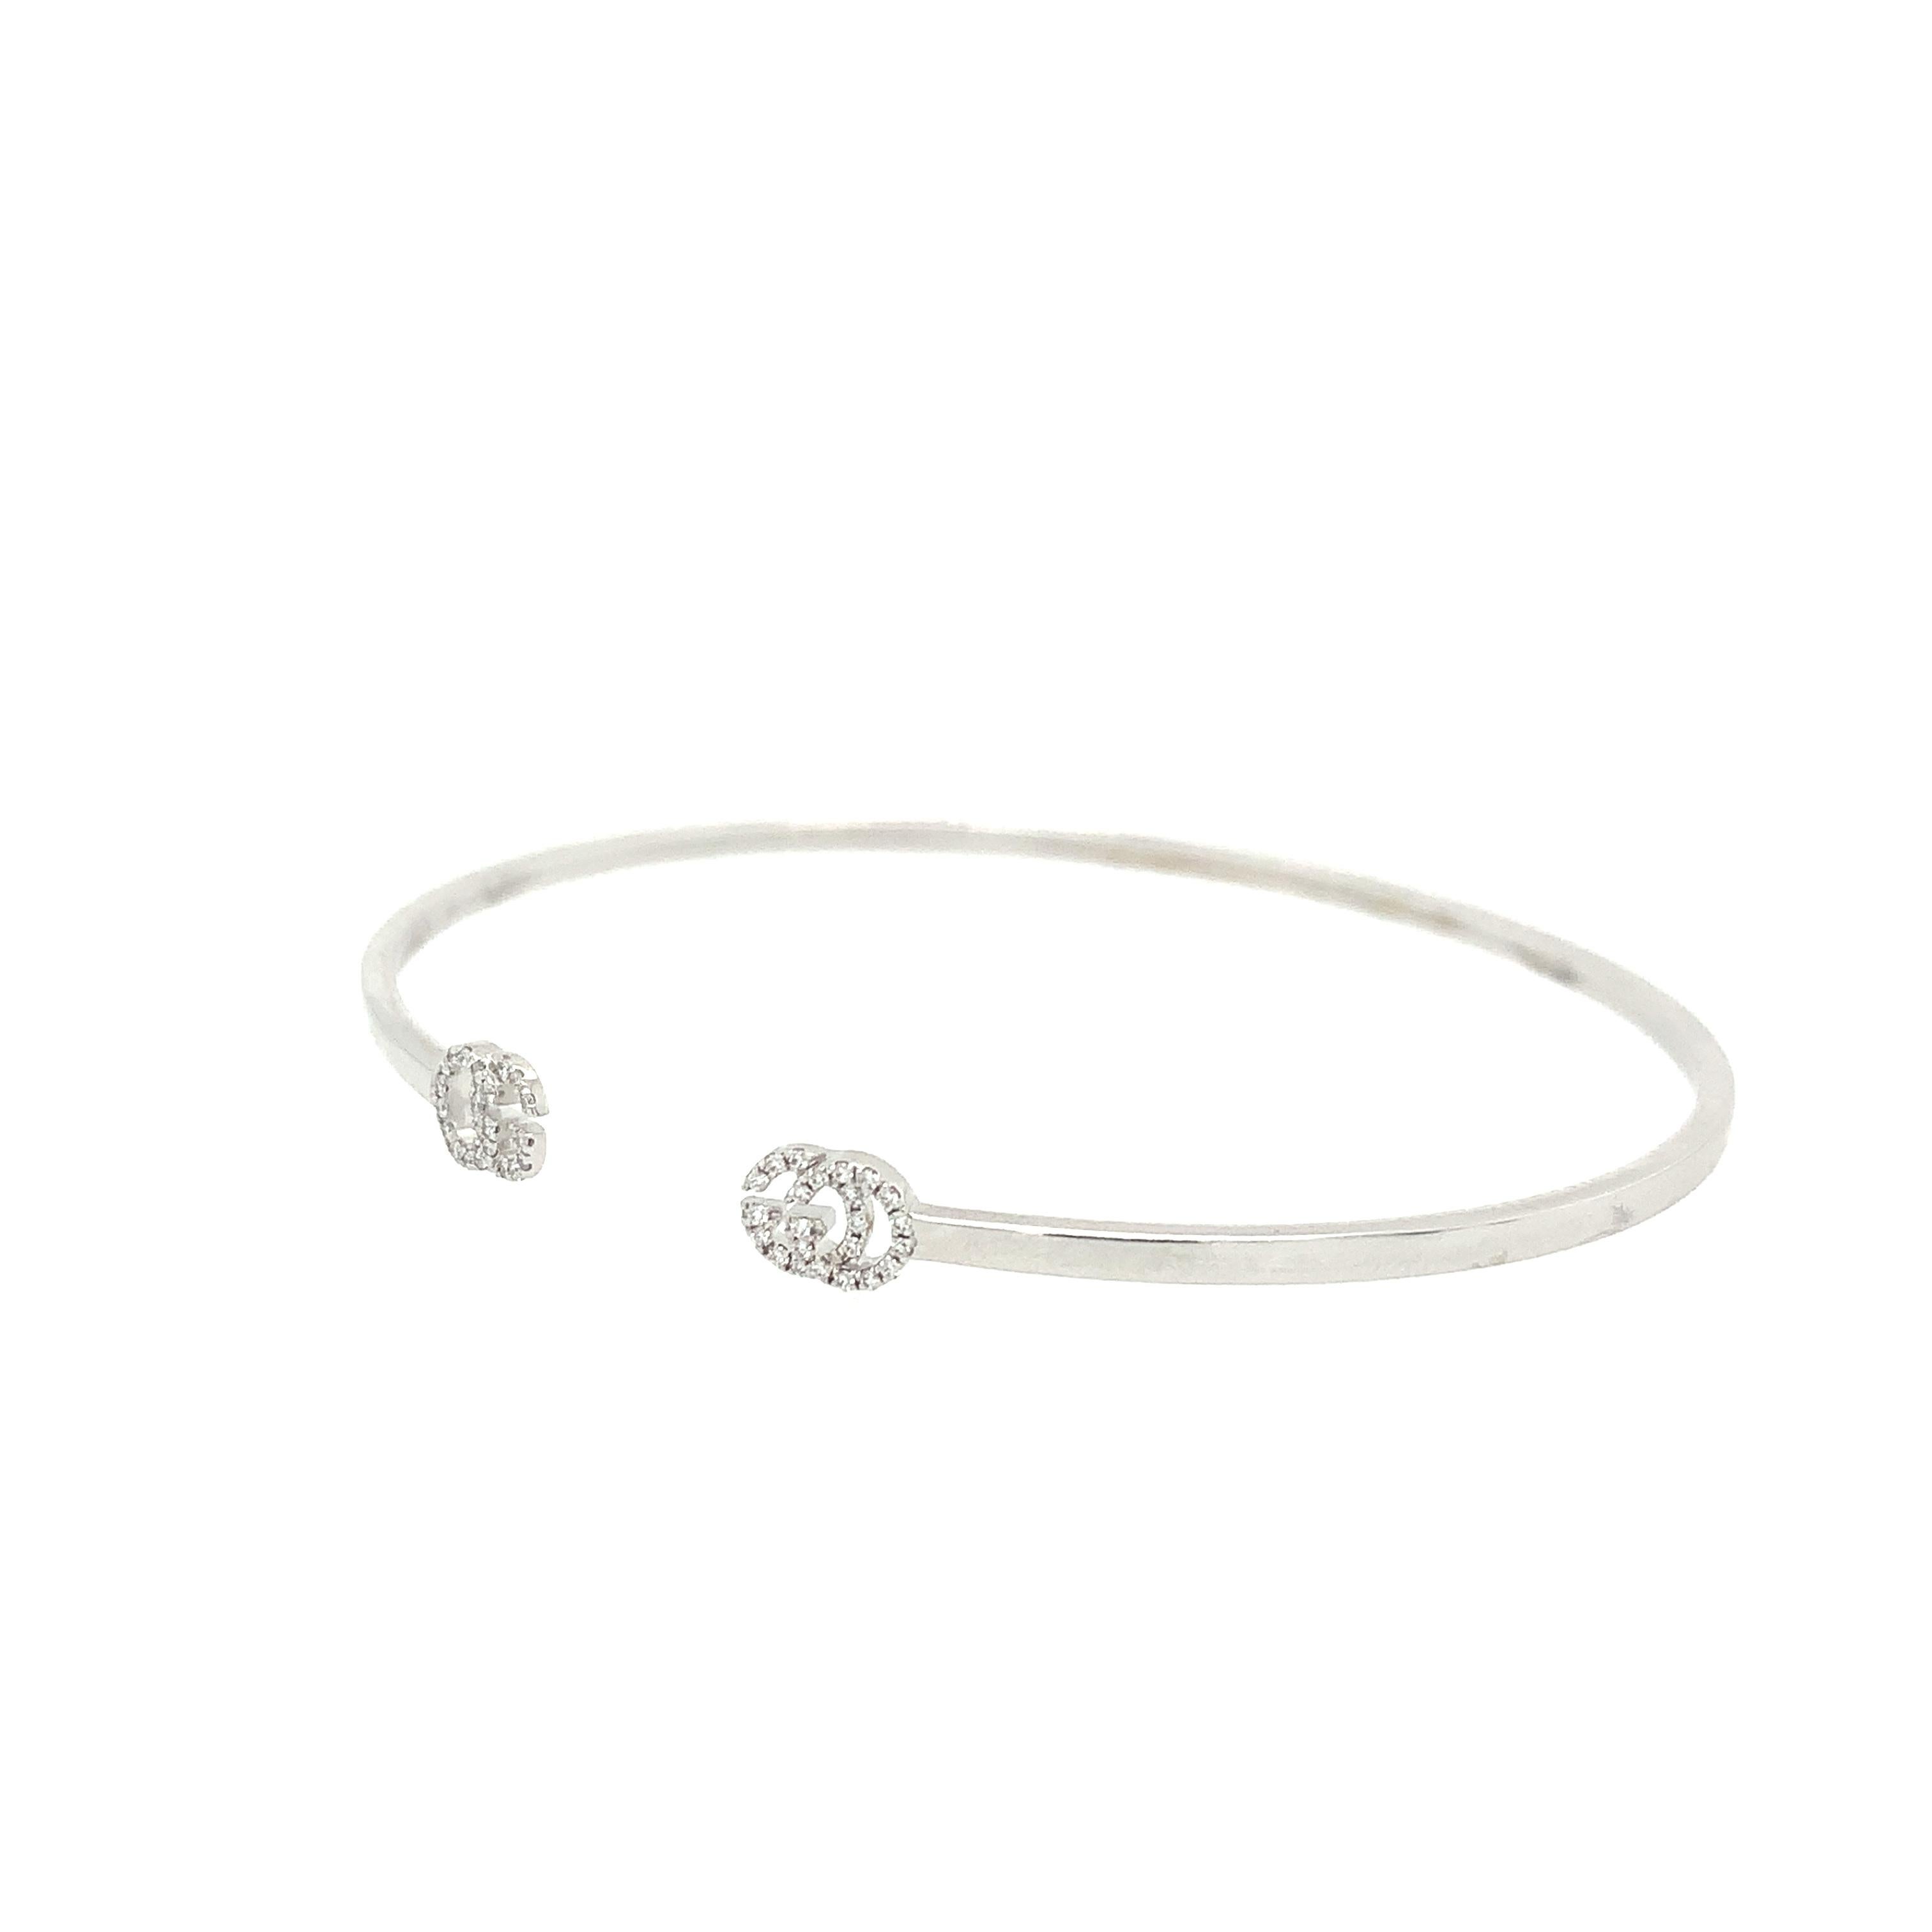 Clean lines with an elegant feel, the 18K white gold cuff, featuring a diamond-encrusted Double G at either end, adds a classic touch to Gucci's fine jewelry collection. The thin design allows this style to be worn stacked with other bracelets or on